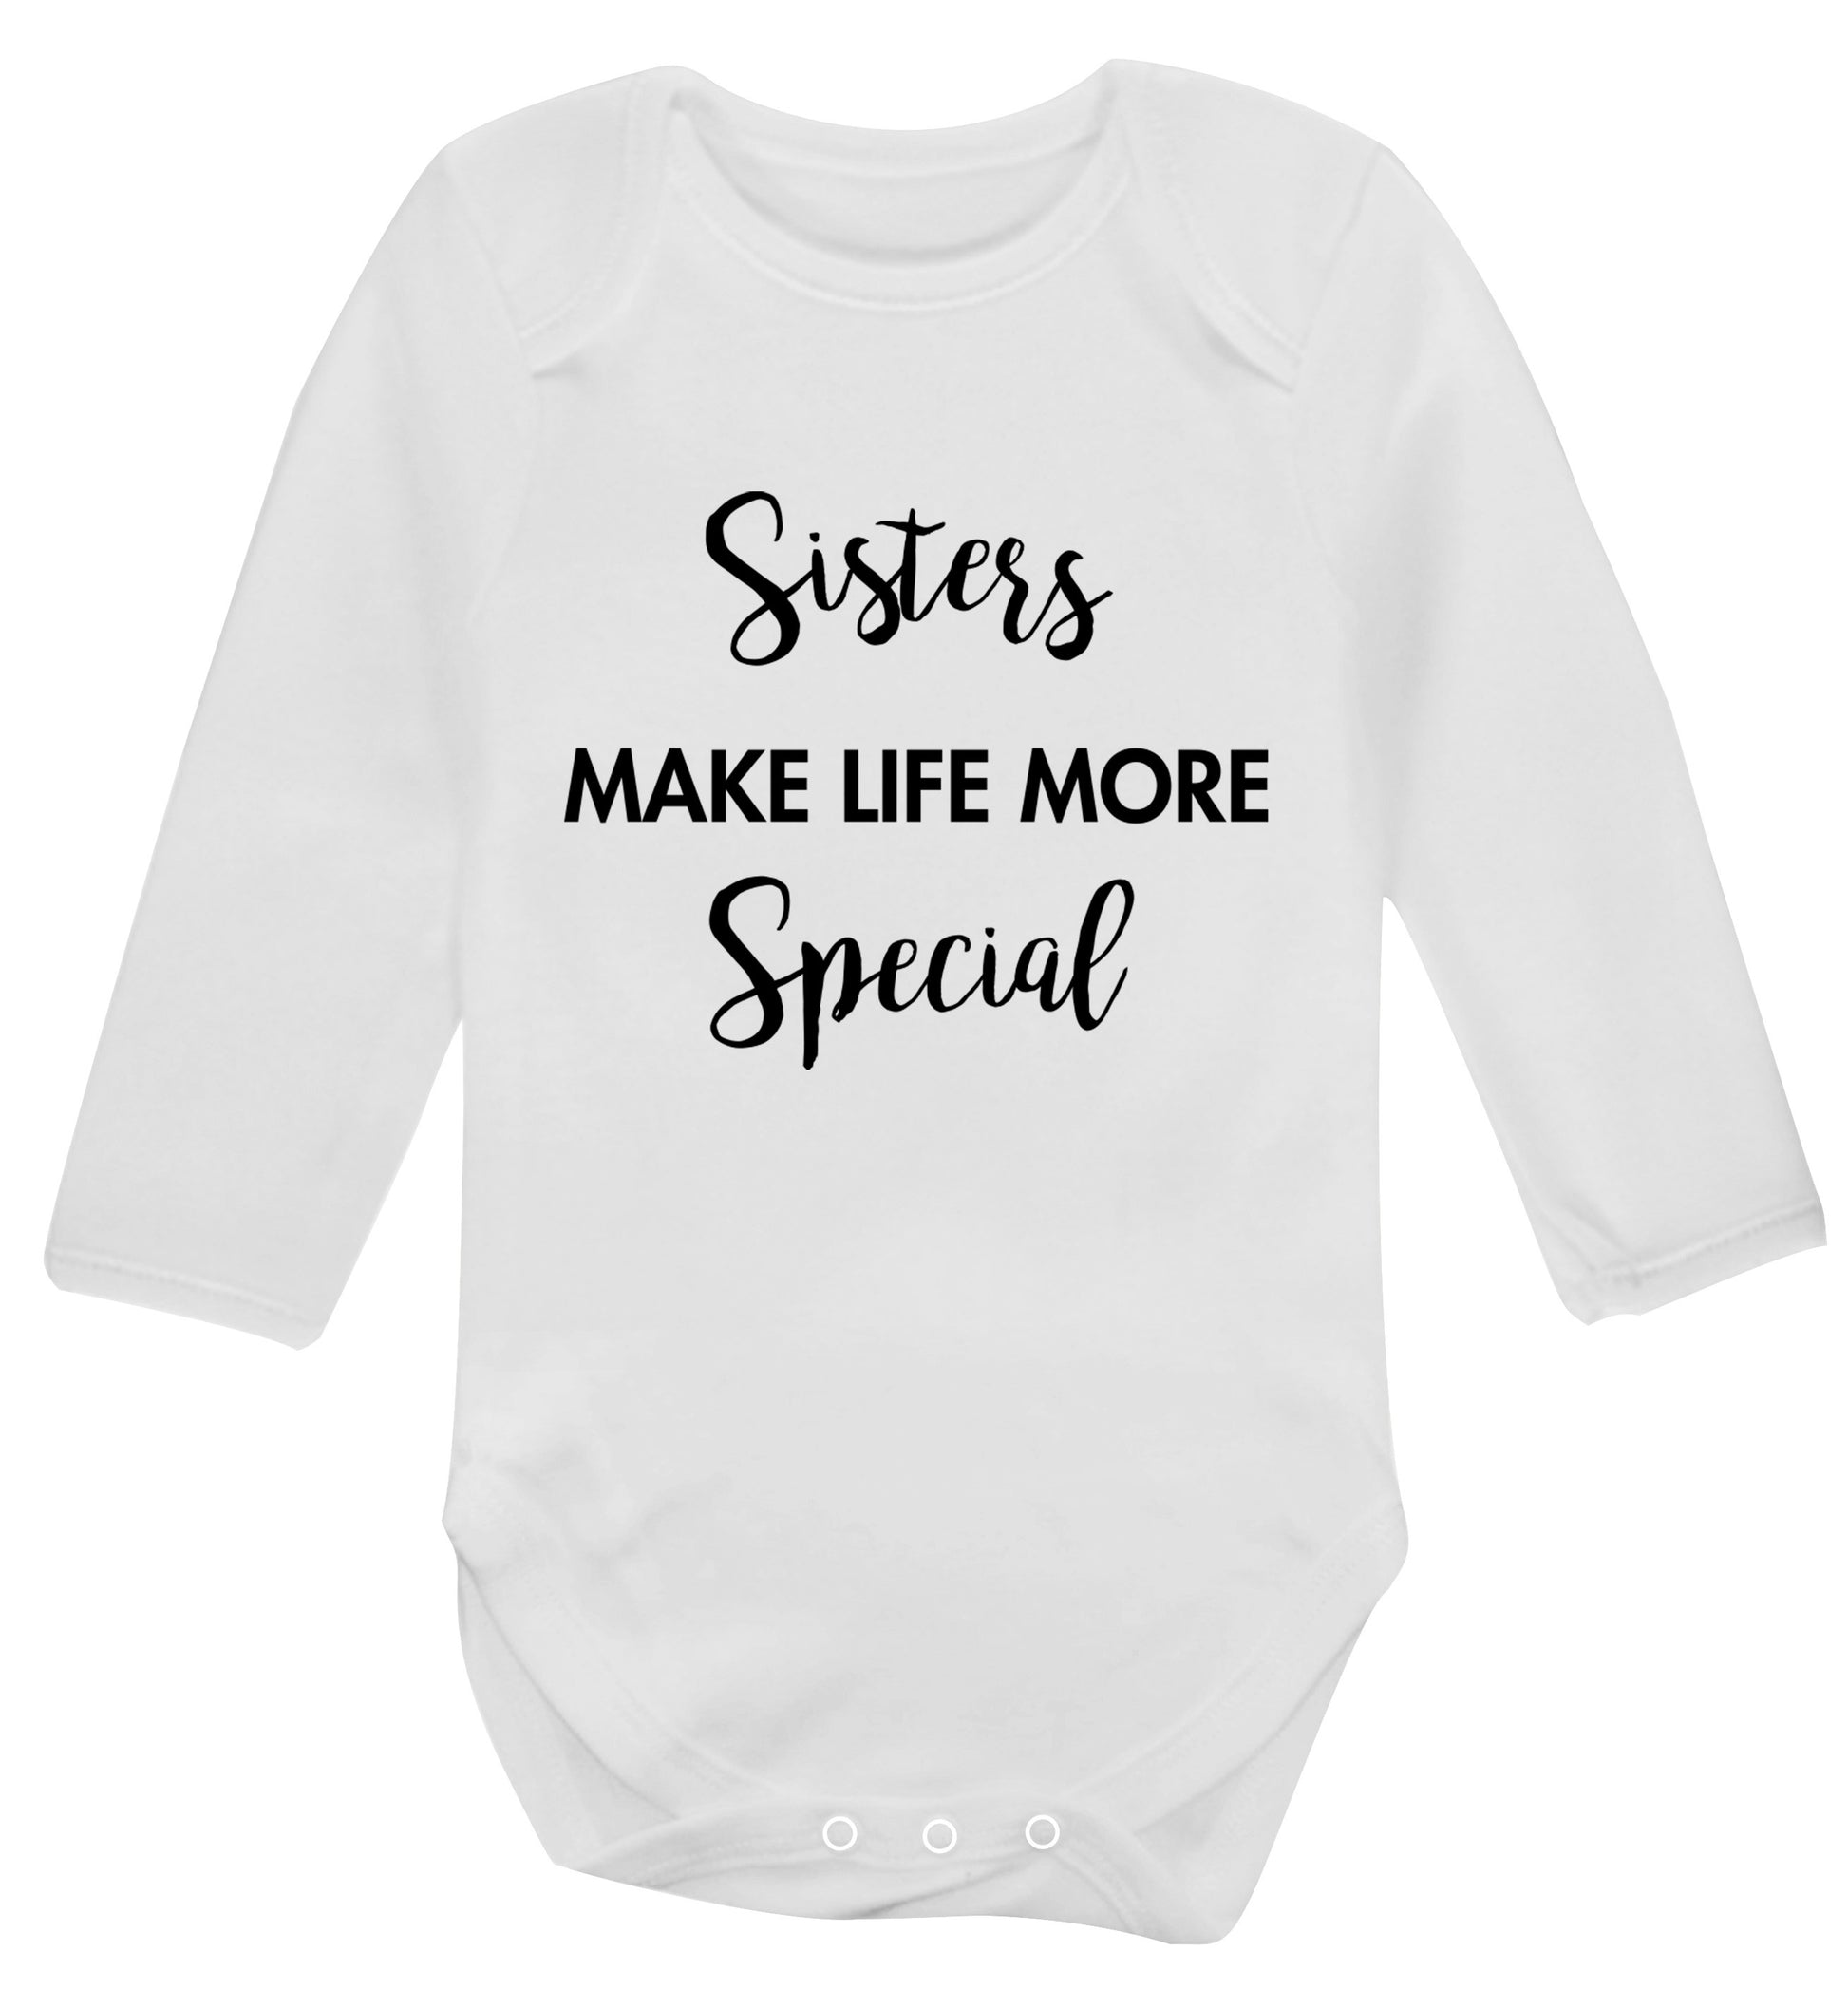 Sisters make life more special Baby Vest long sleeved white 6-12 months